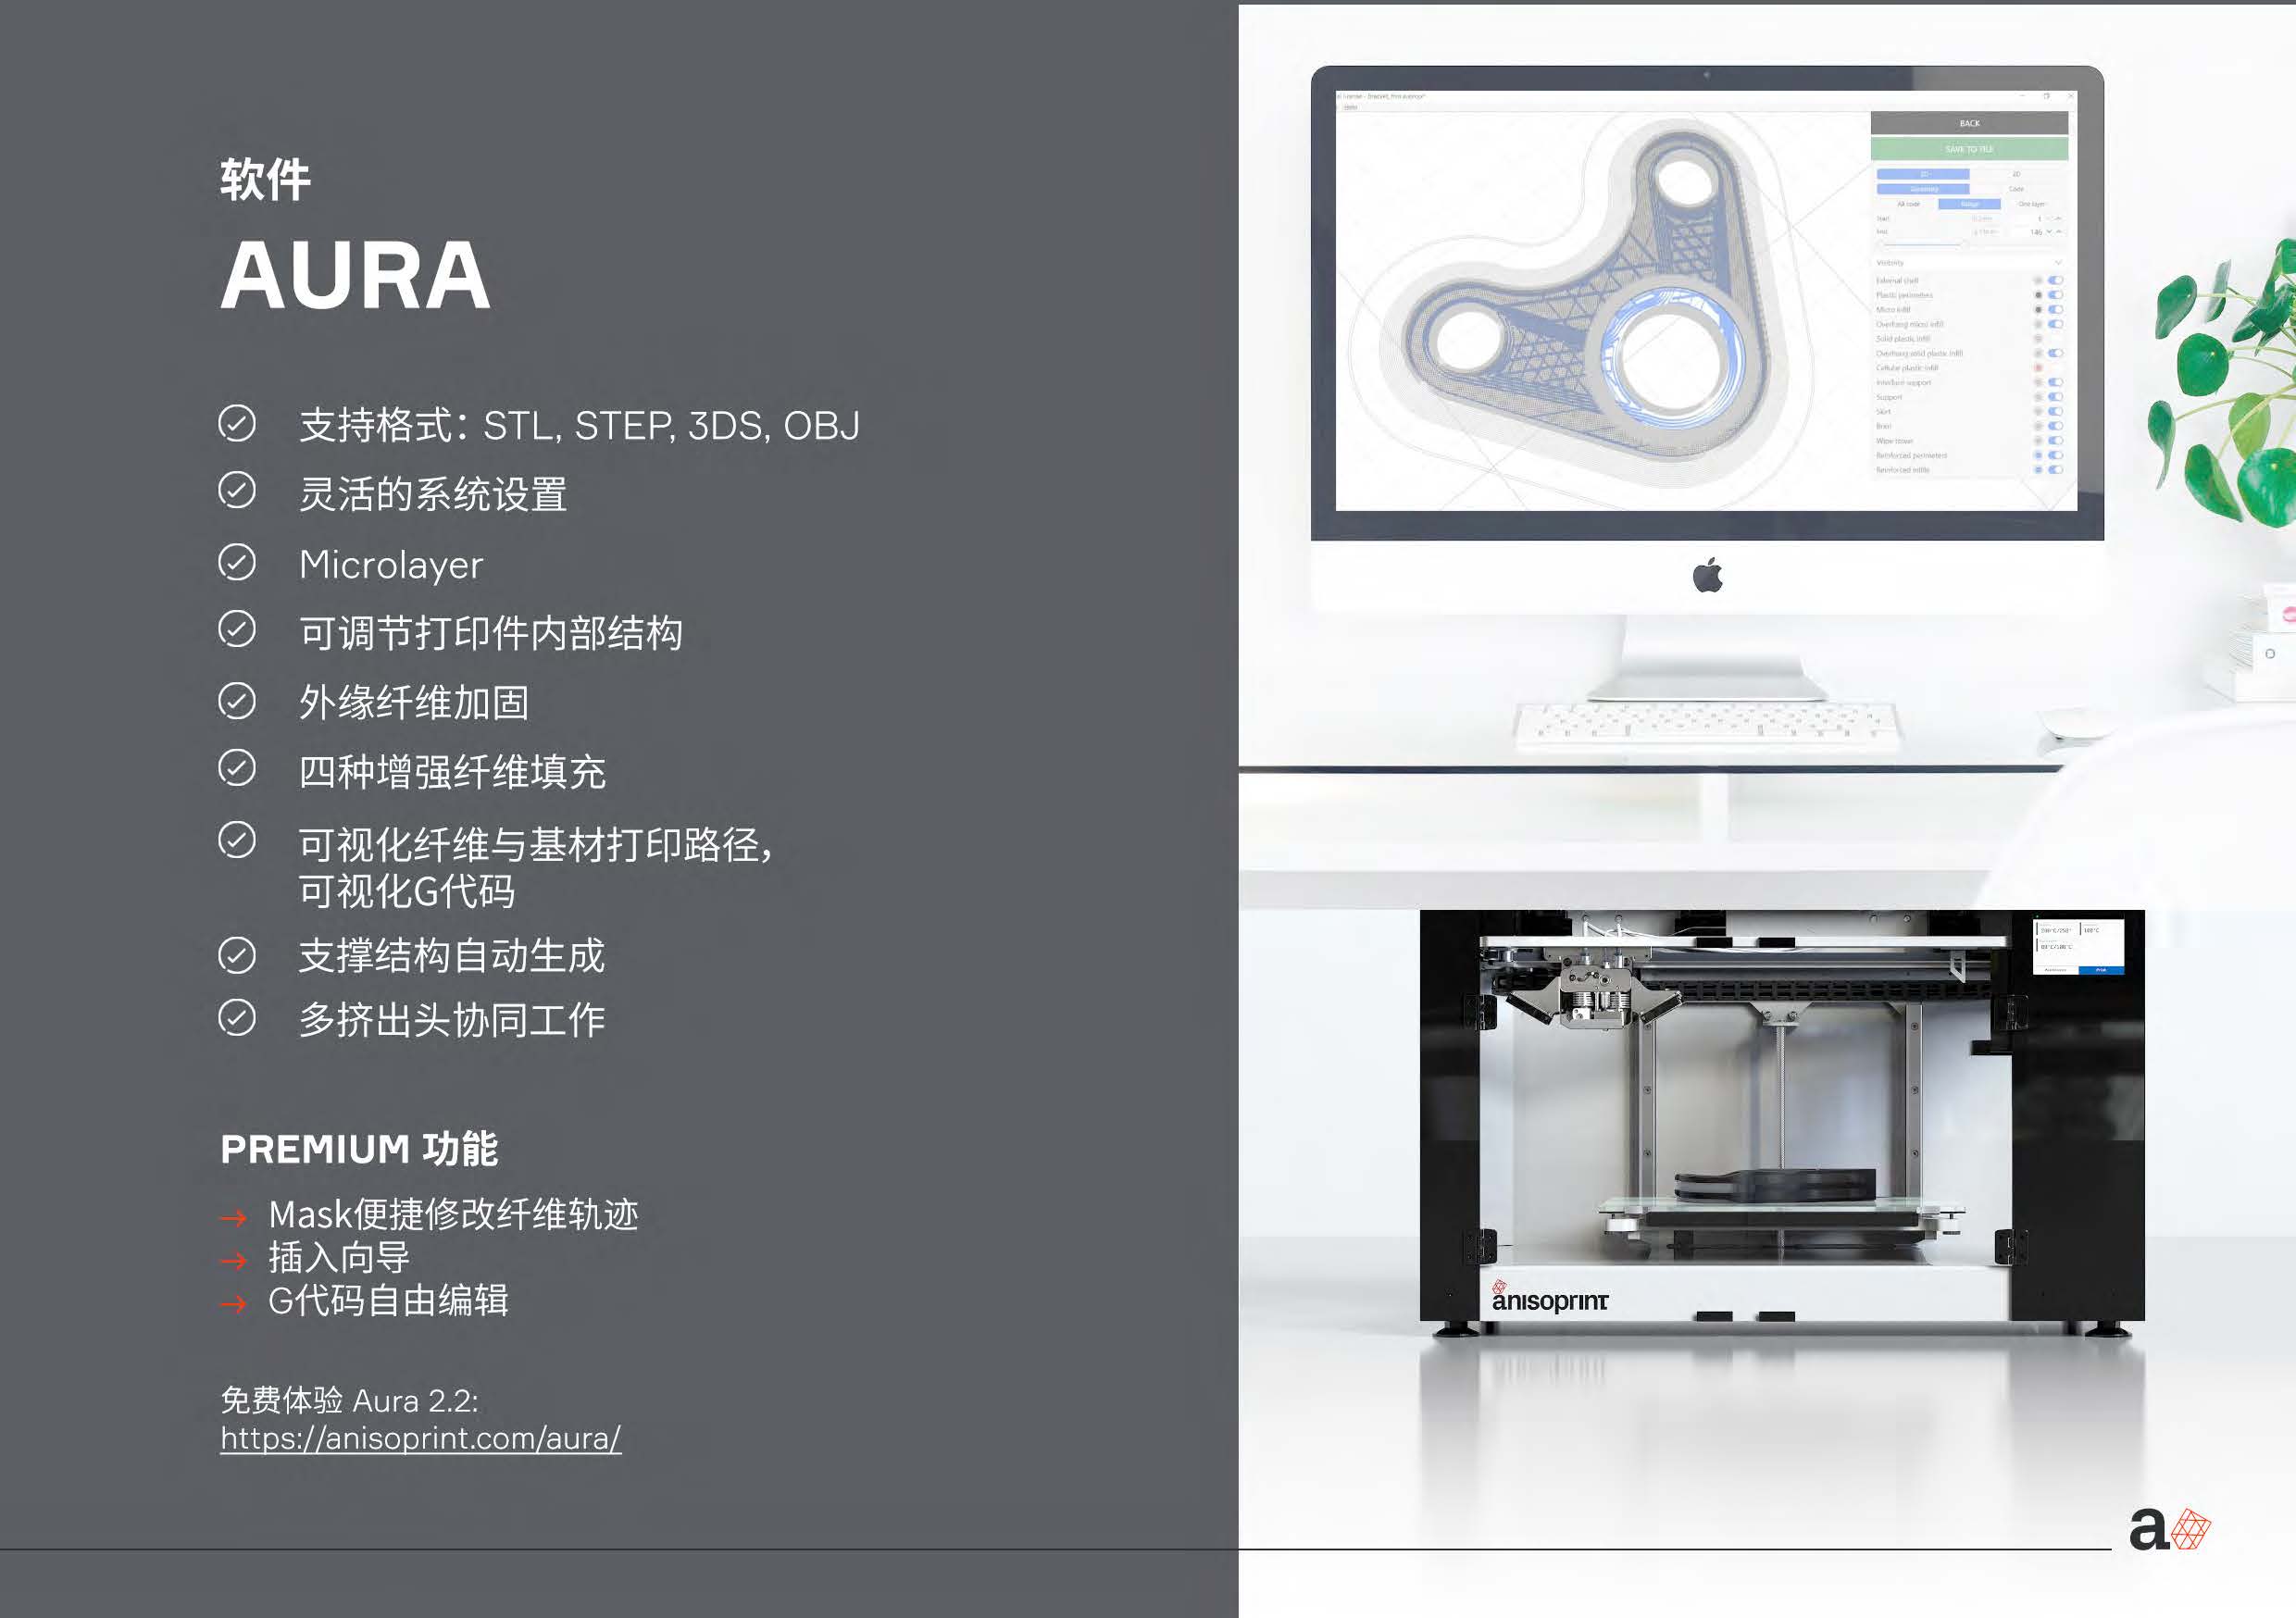 Continuous carbon fiber 3D printer open system composite material laying trajectory free control